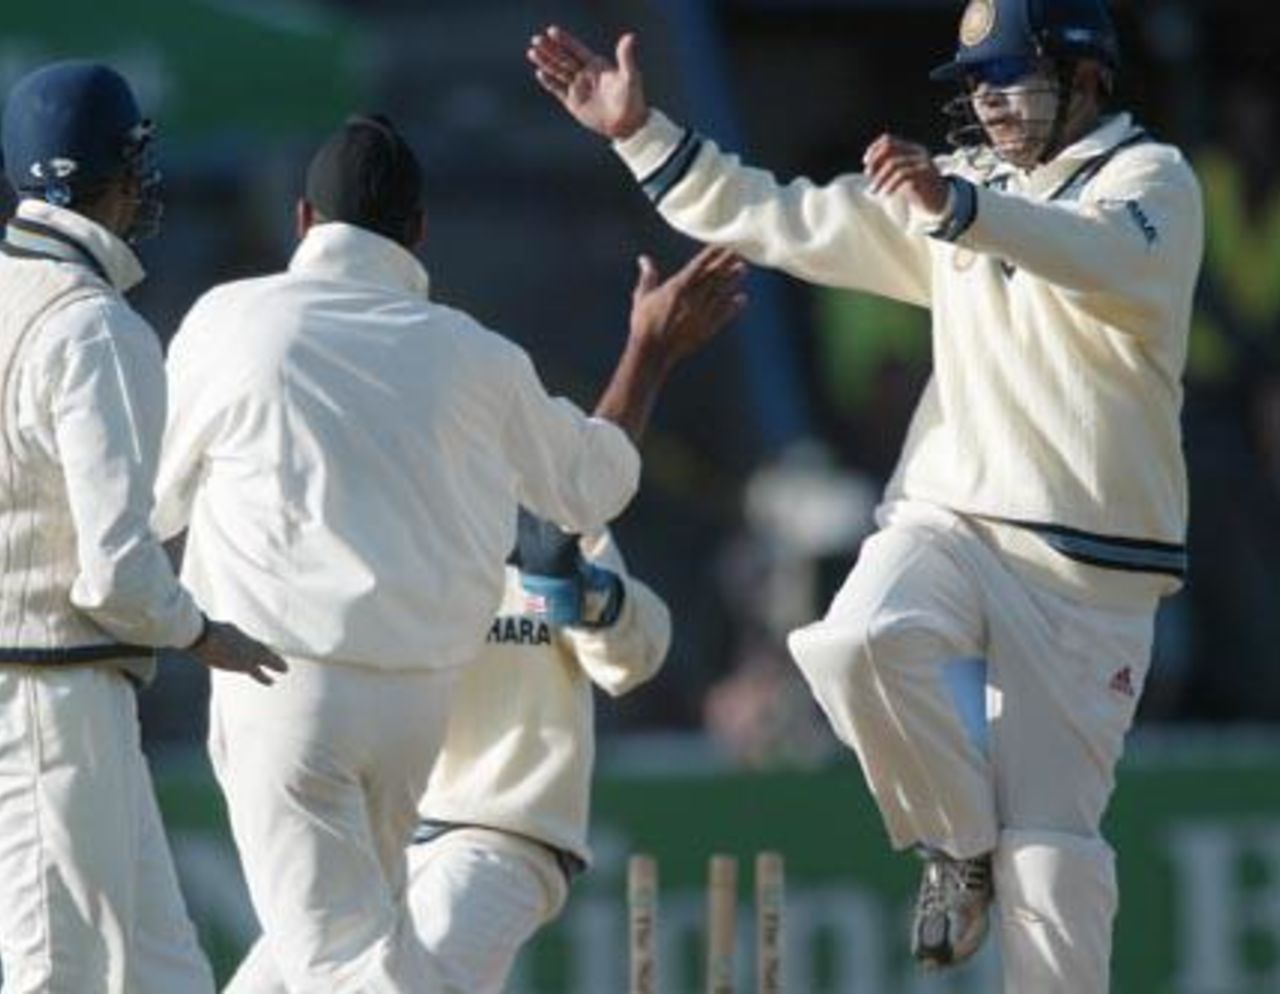 Members of the Indian team celebrate the dismissal of New Zealand batsman Scott Styris, stumped by wicket-keeper Parthiv Patel off the bowling of Harbhajan Singh for 0. From left: VVS Laxman, Harbhajan, Patel (obscured) and Virender Sehwag. 1st Test: New Zealand v India at Basin Reserve, Wellington, 12-16 December 2002 (13 December 2002).